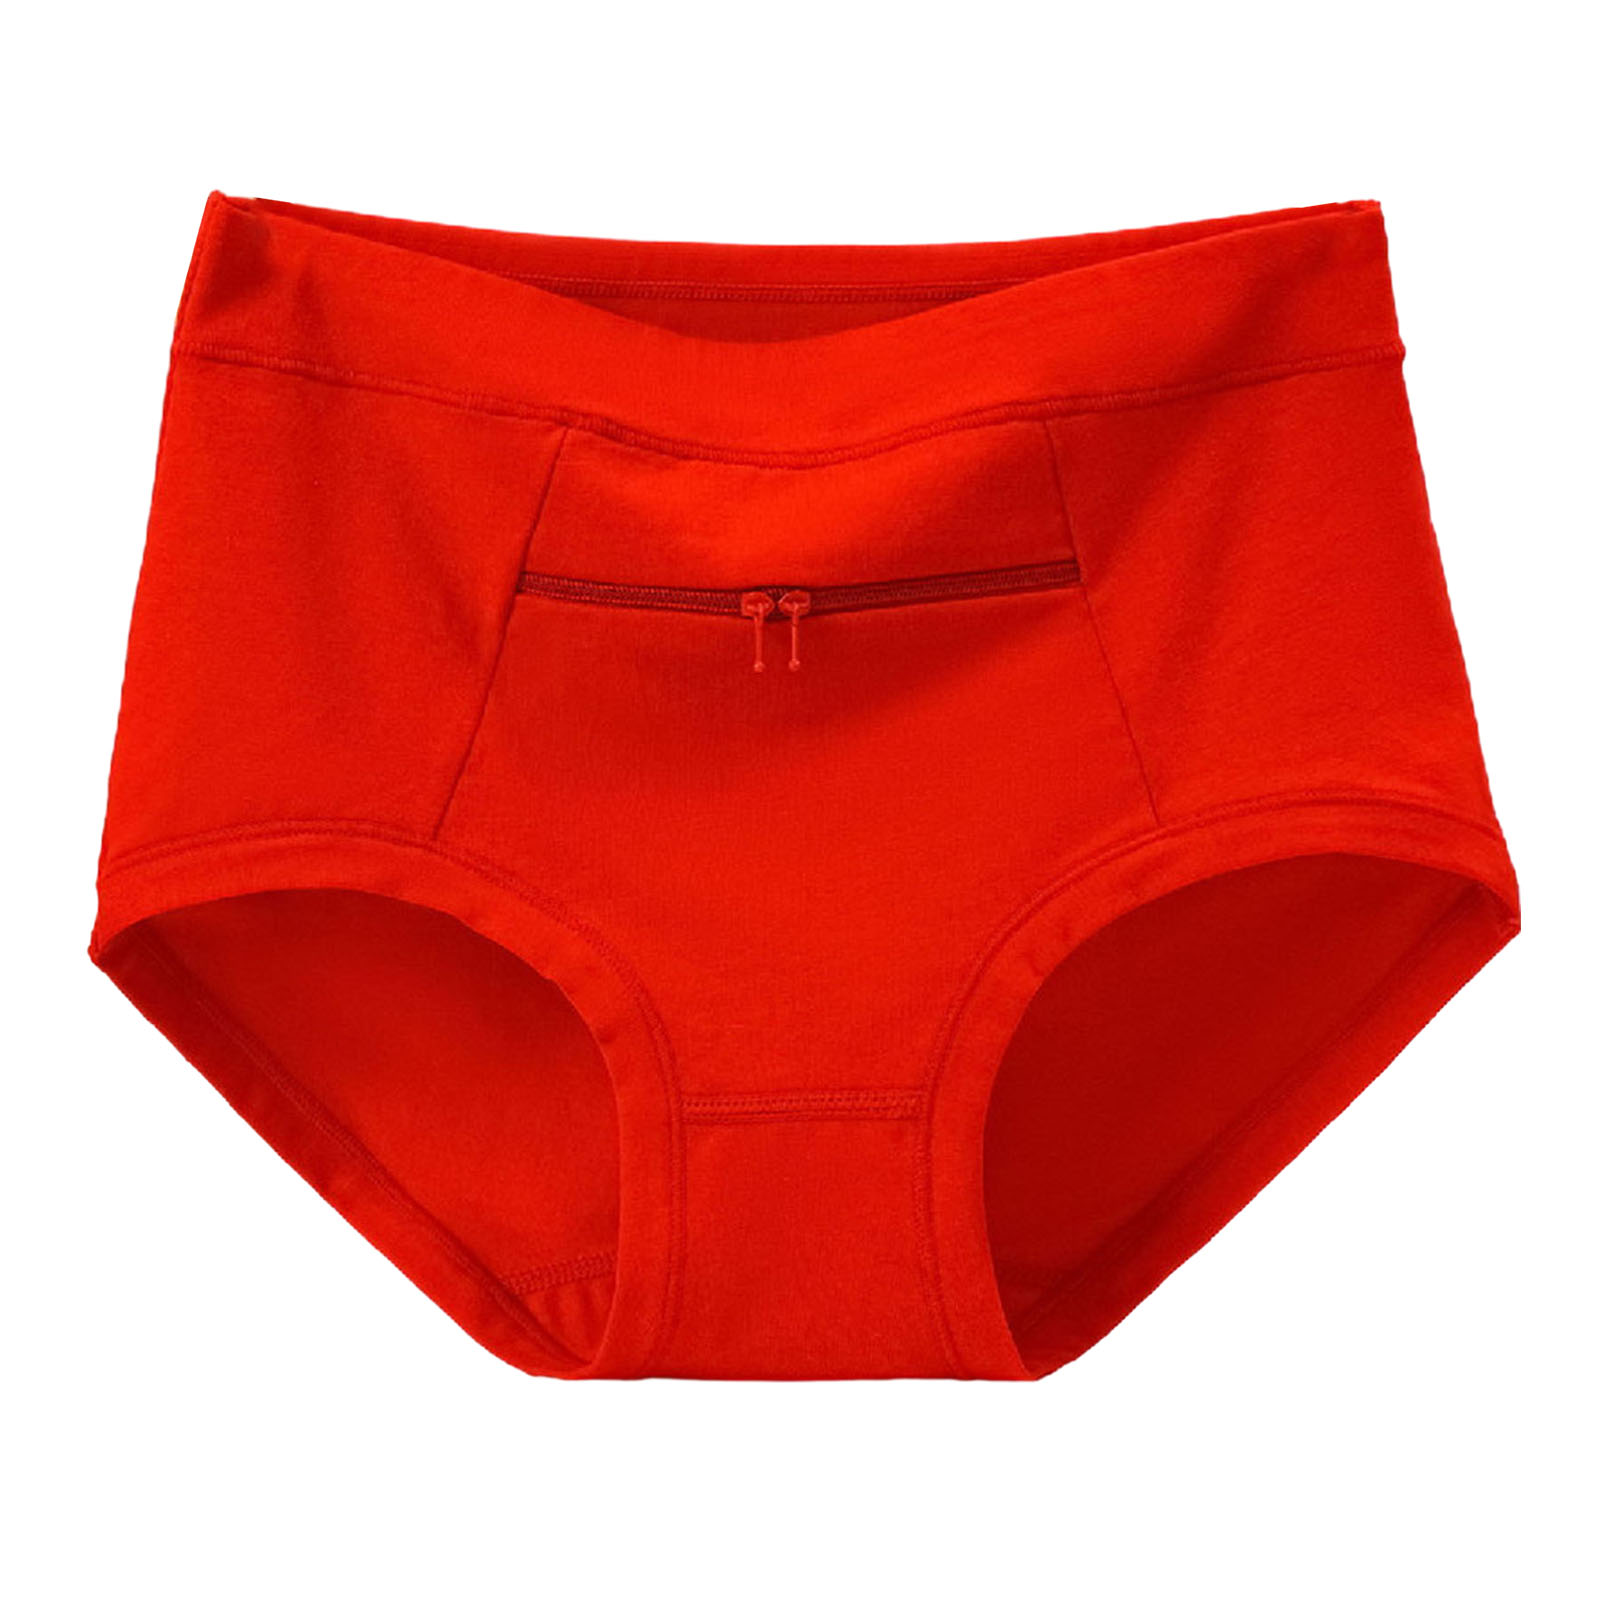 Women Panties with Zipper Big Size Female Cotton Underwear with